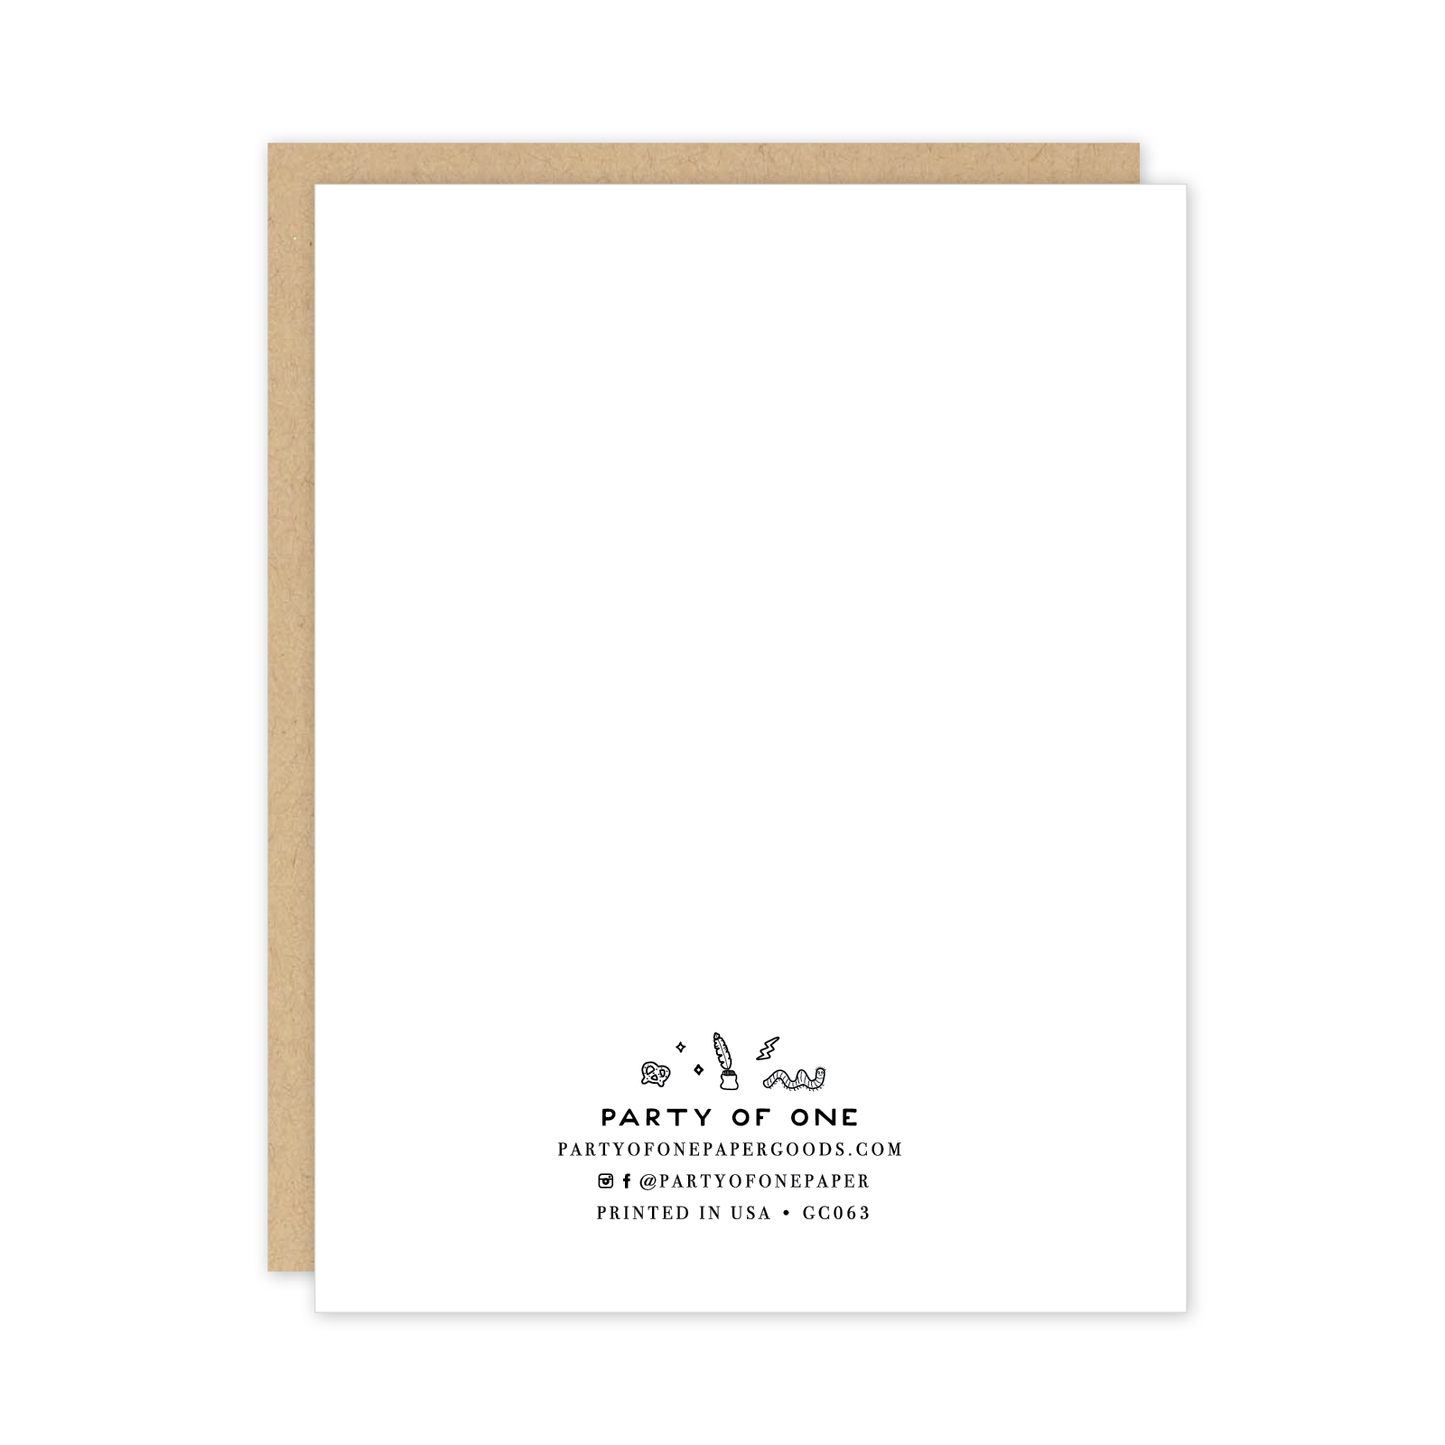 Love Never Stops Growing Friendship Card